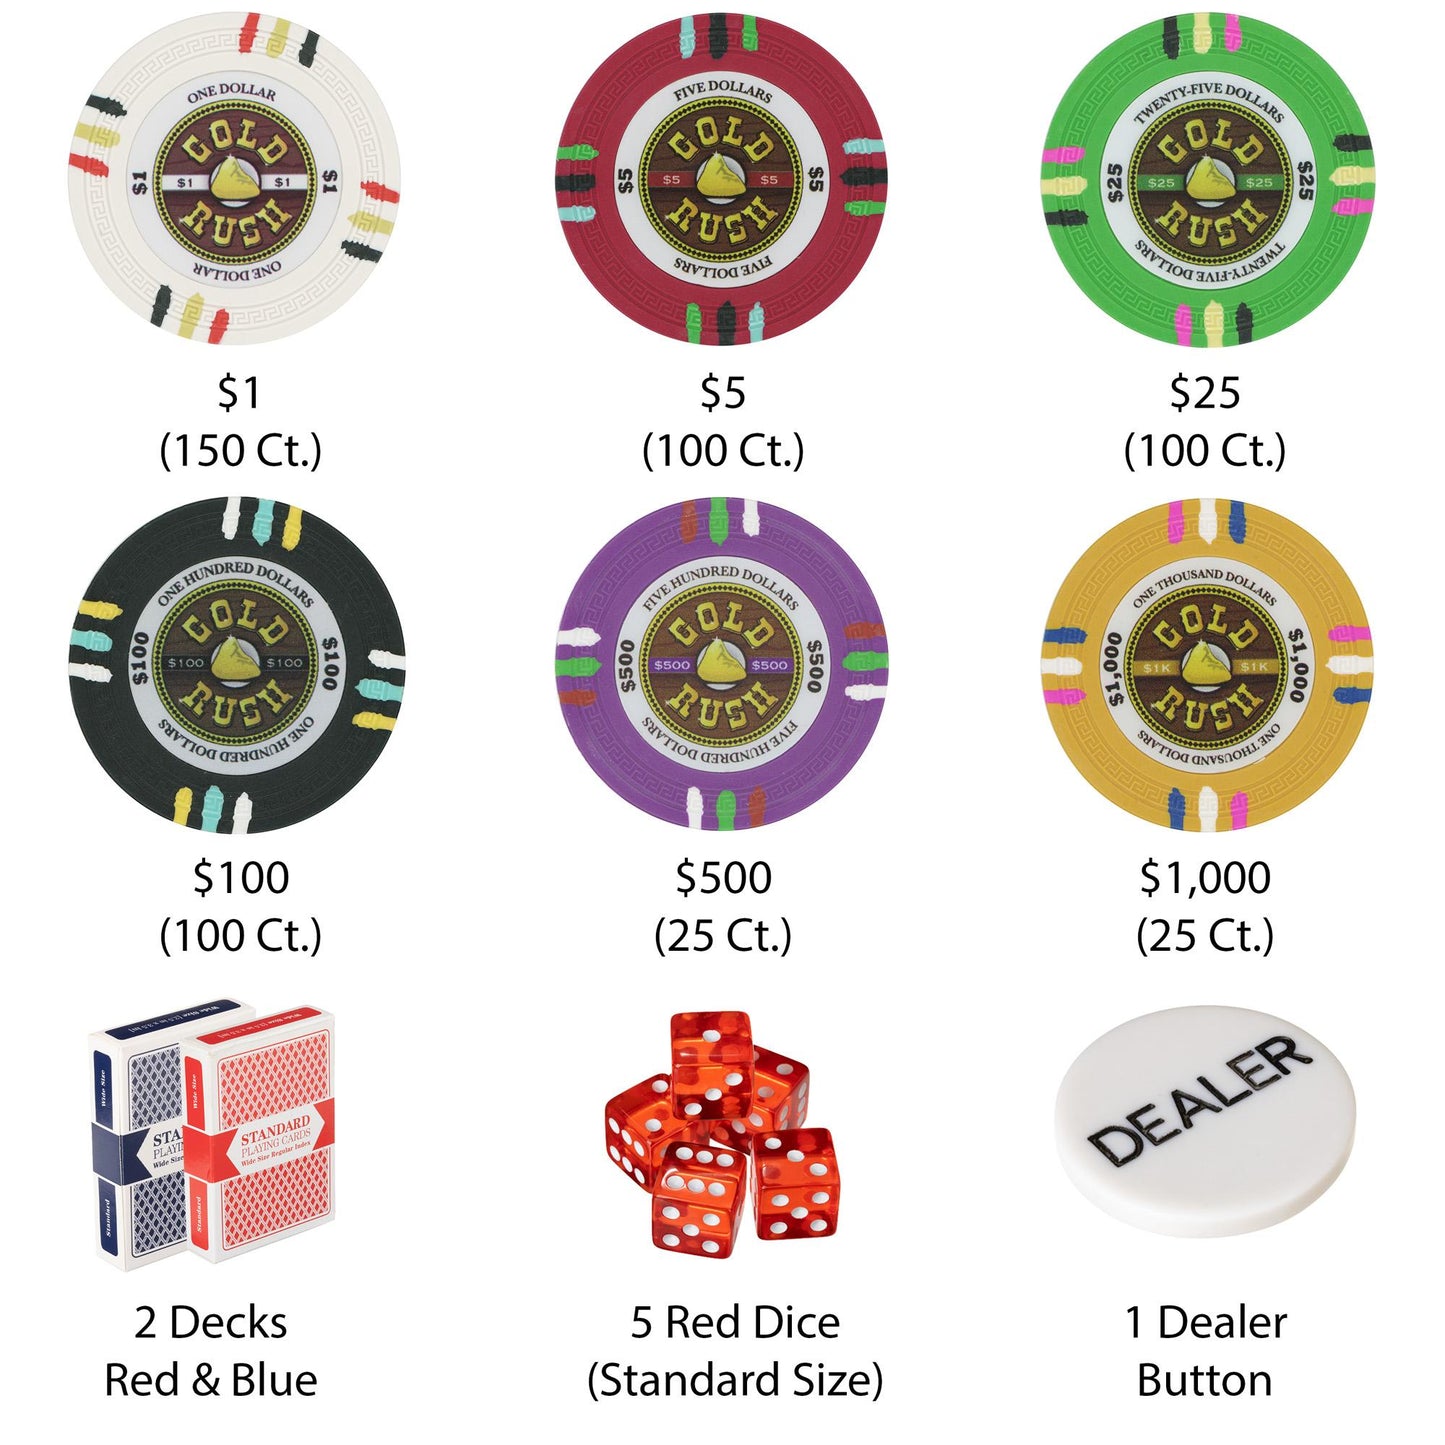 500 Gold Rush Poker Chips with Aluminum Case